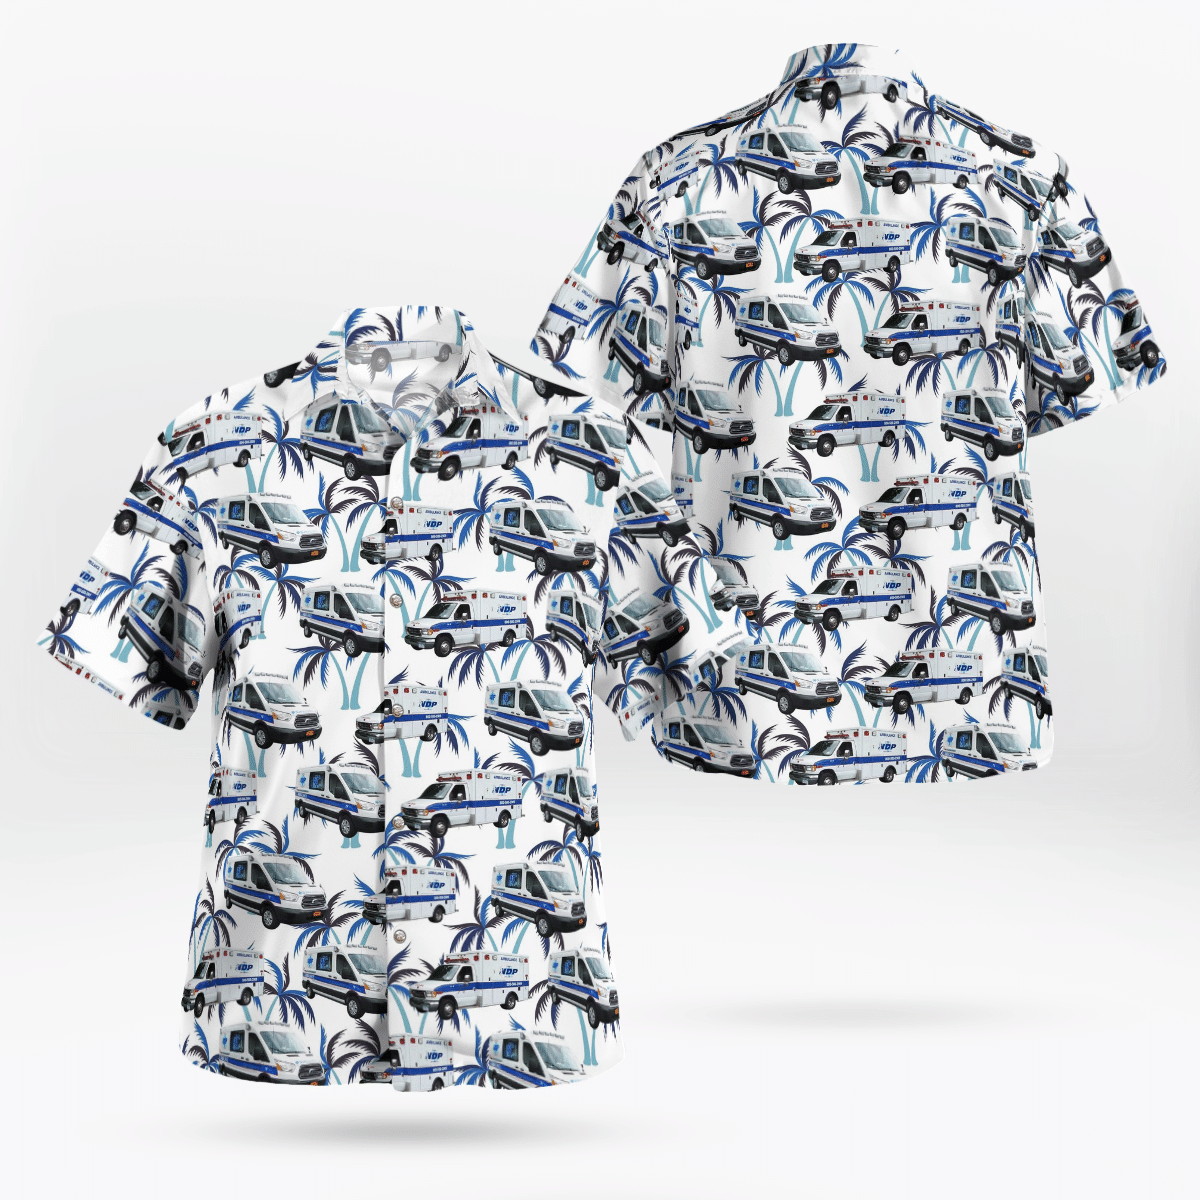 Shop now to find the perfect Hawaii Shirt for your hobby 79